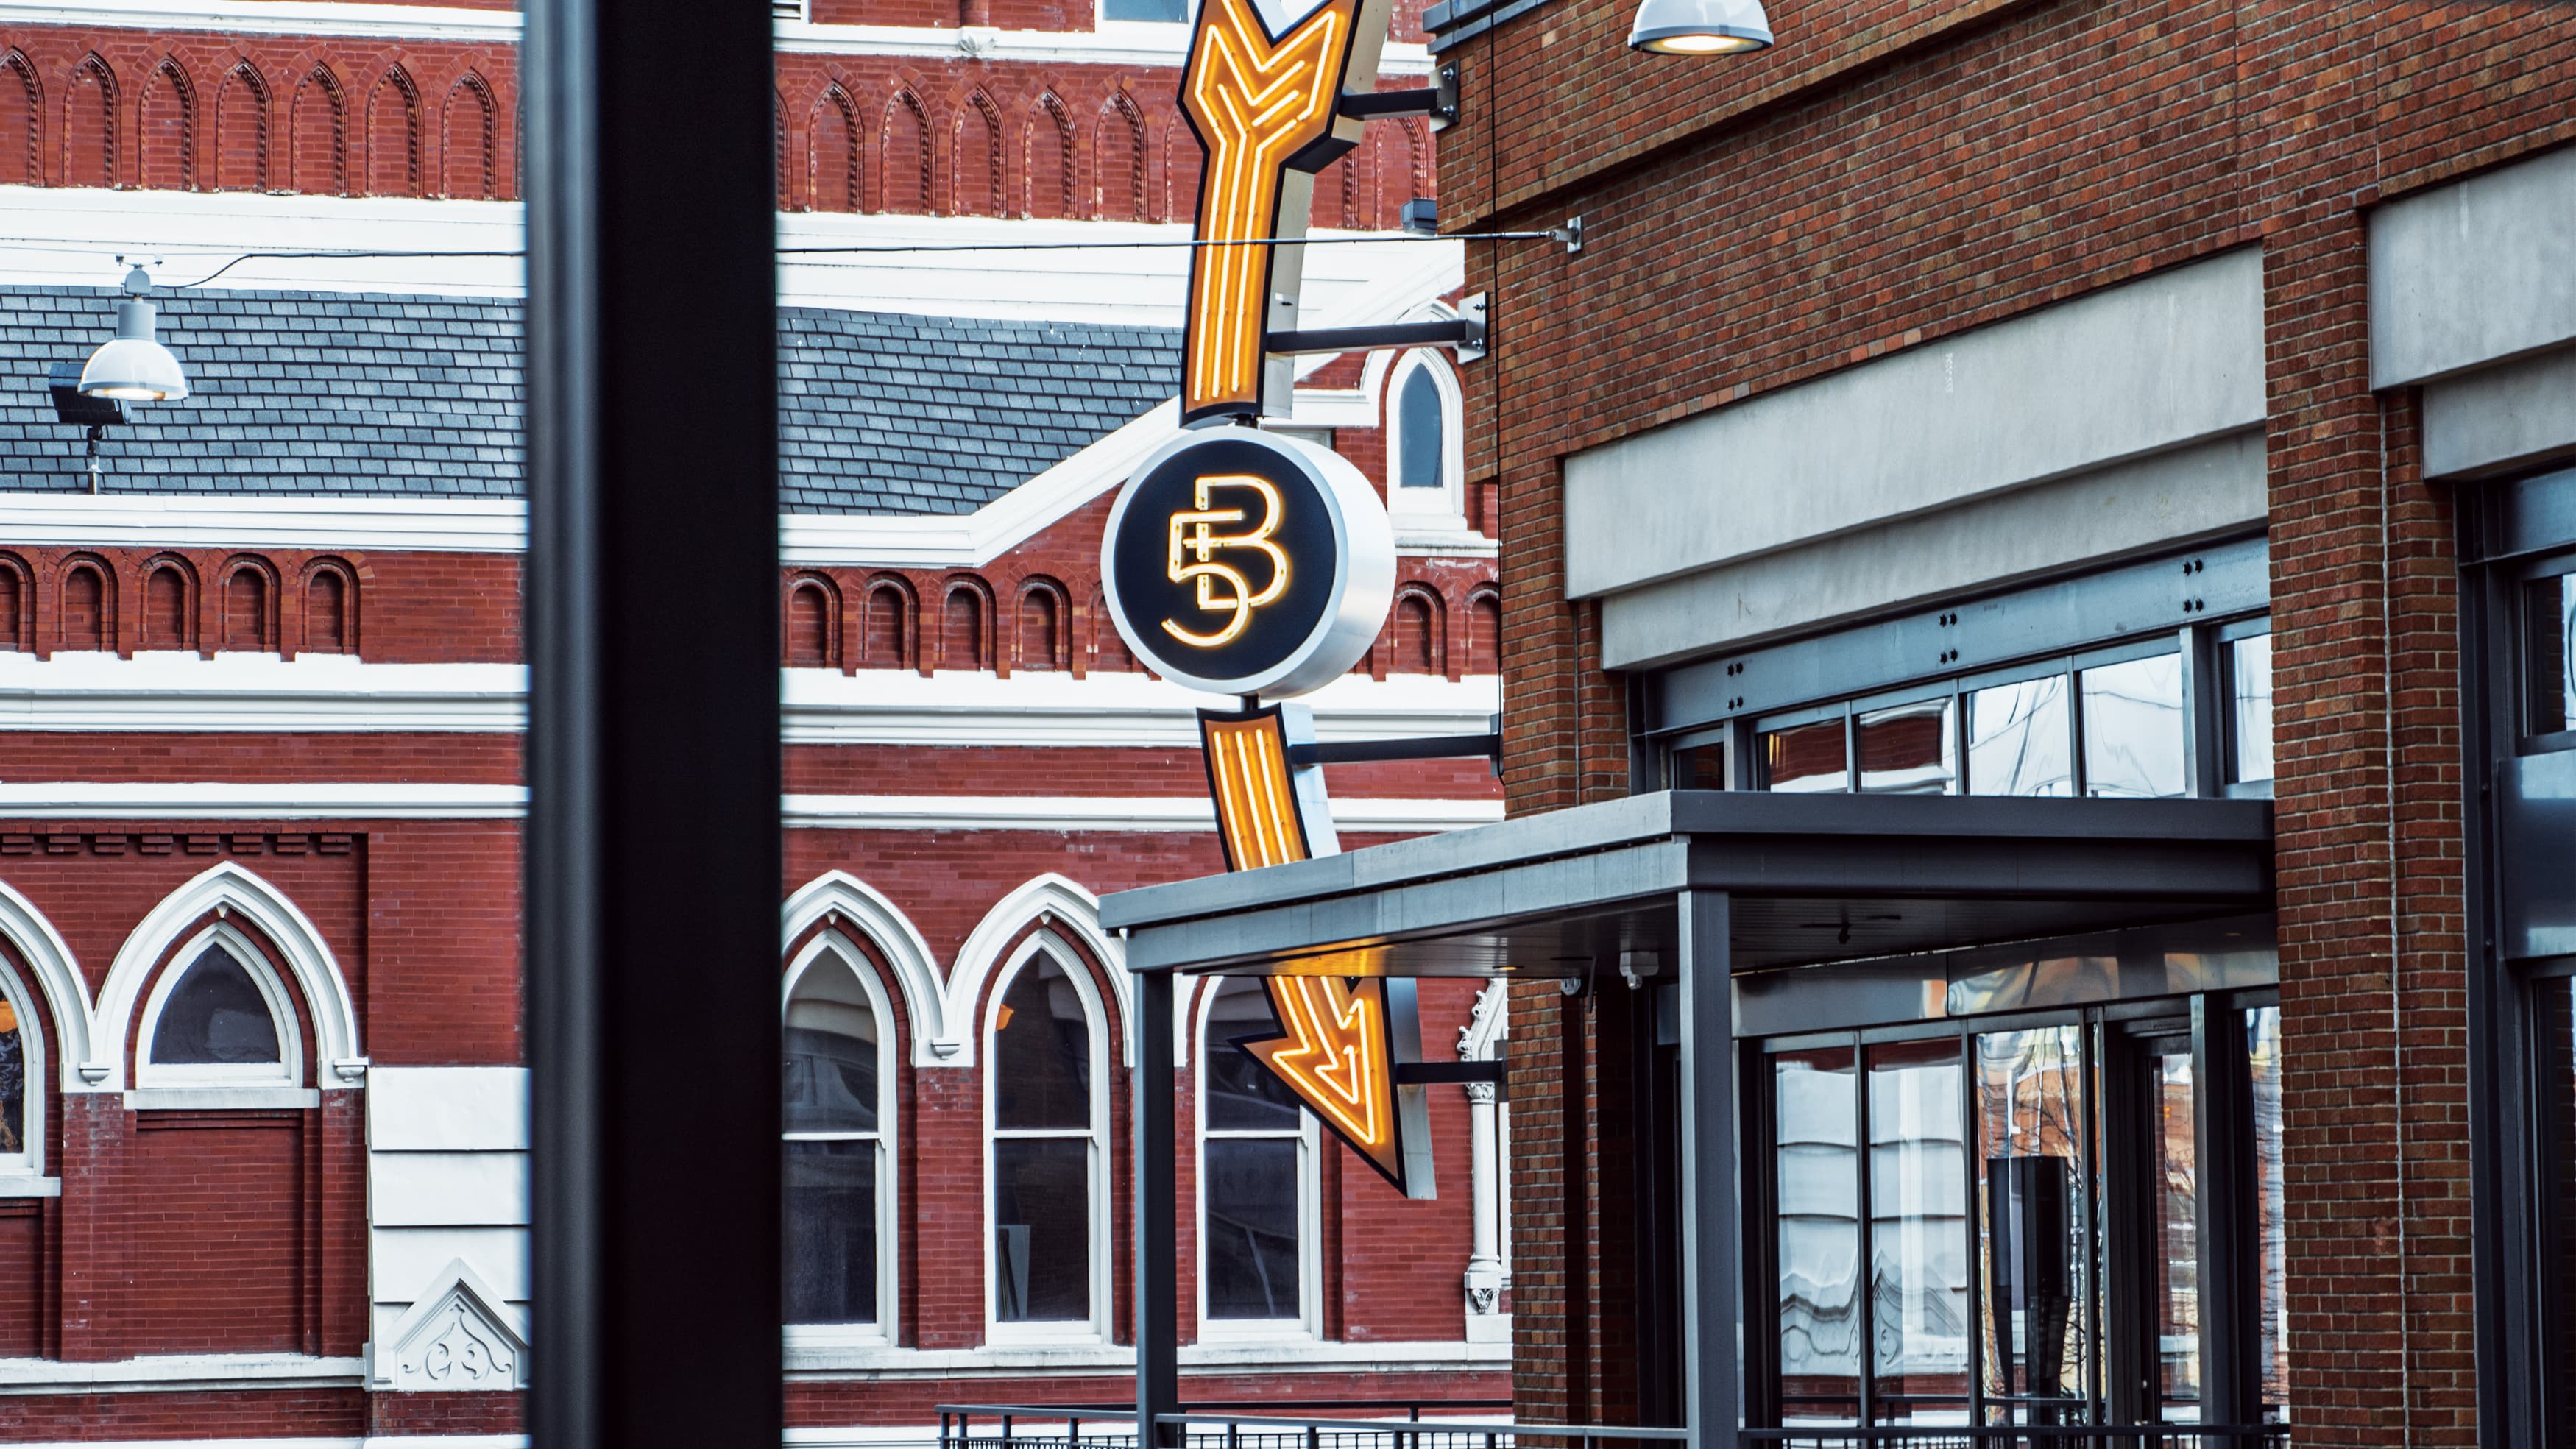 A detailed view of the Fifth and Broadway project identity sign